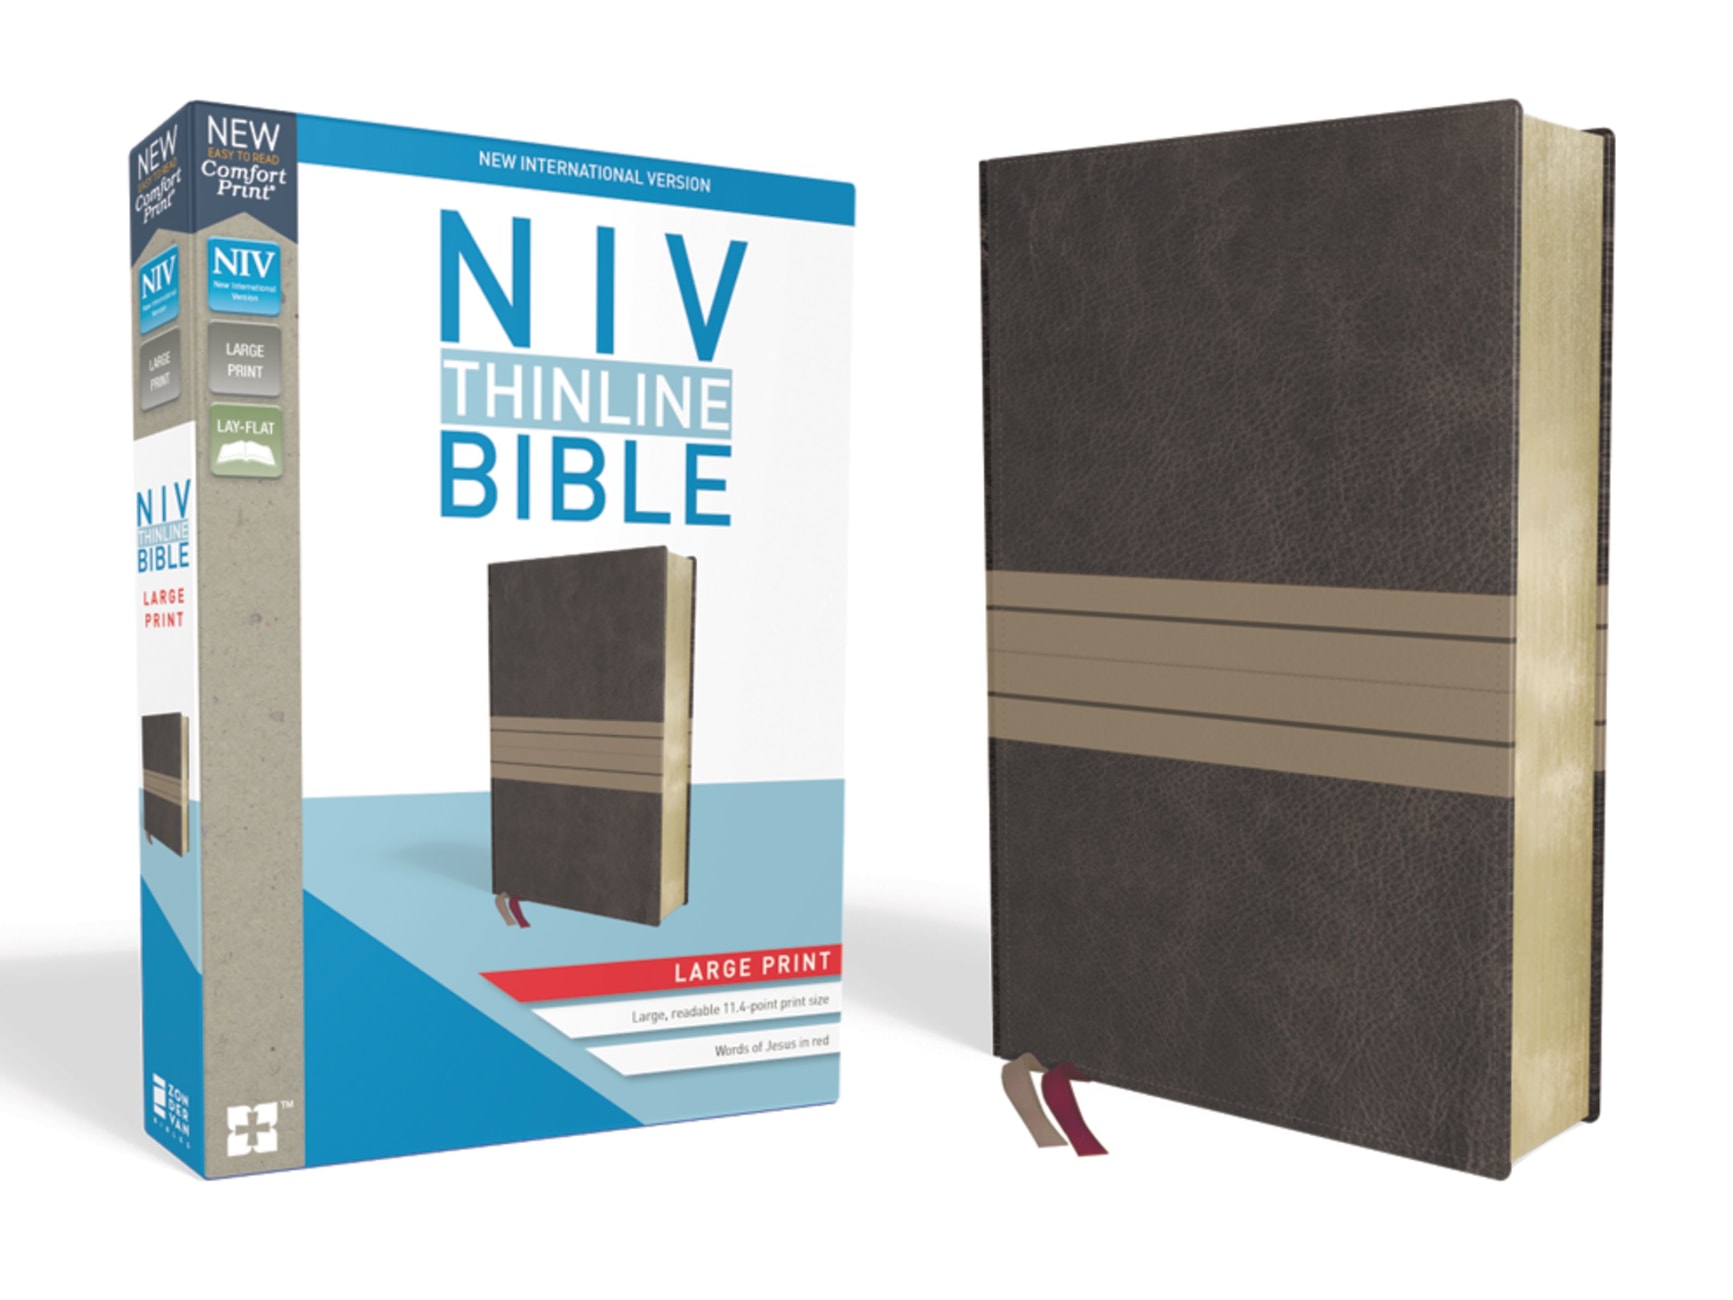 NIV Thinline Bible Large Print Brown/Tan (Red Letter Edition) Premium Imitation Leather